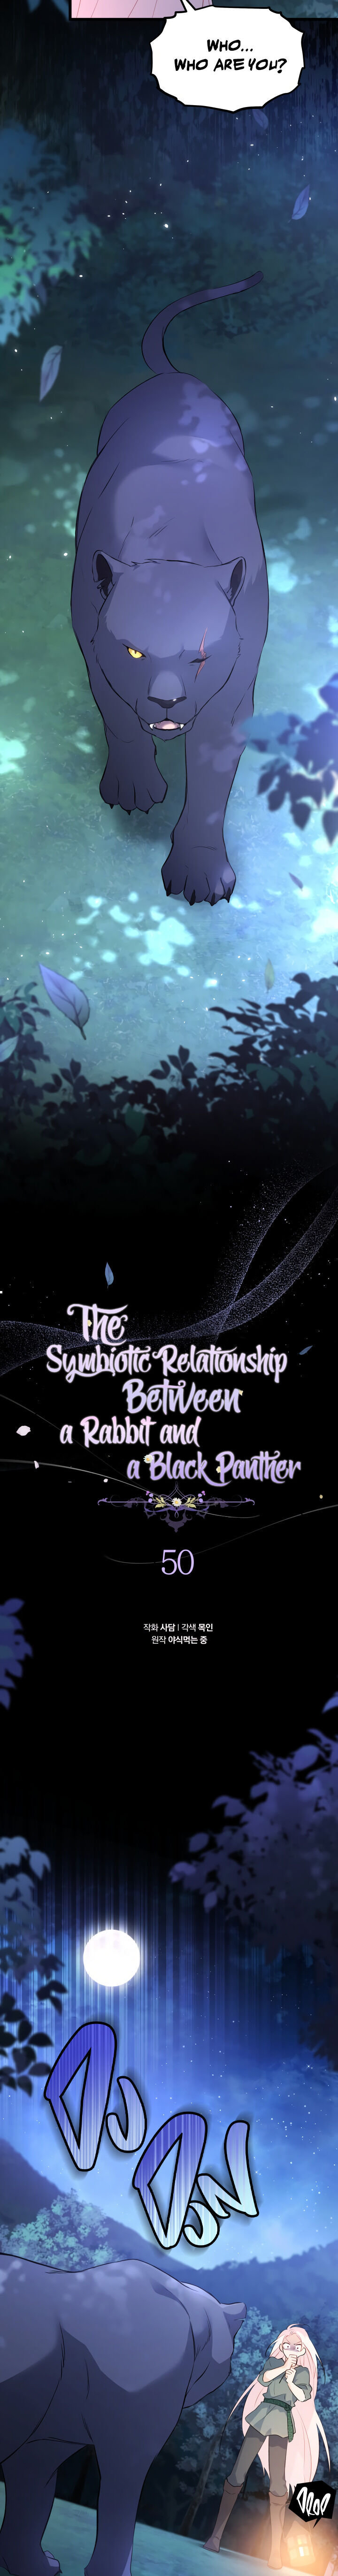 The Symbiotic Relationship Between A Rabbit and A Black Panther - Chapter 50 Page 7